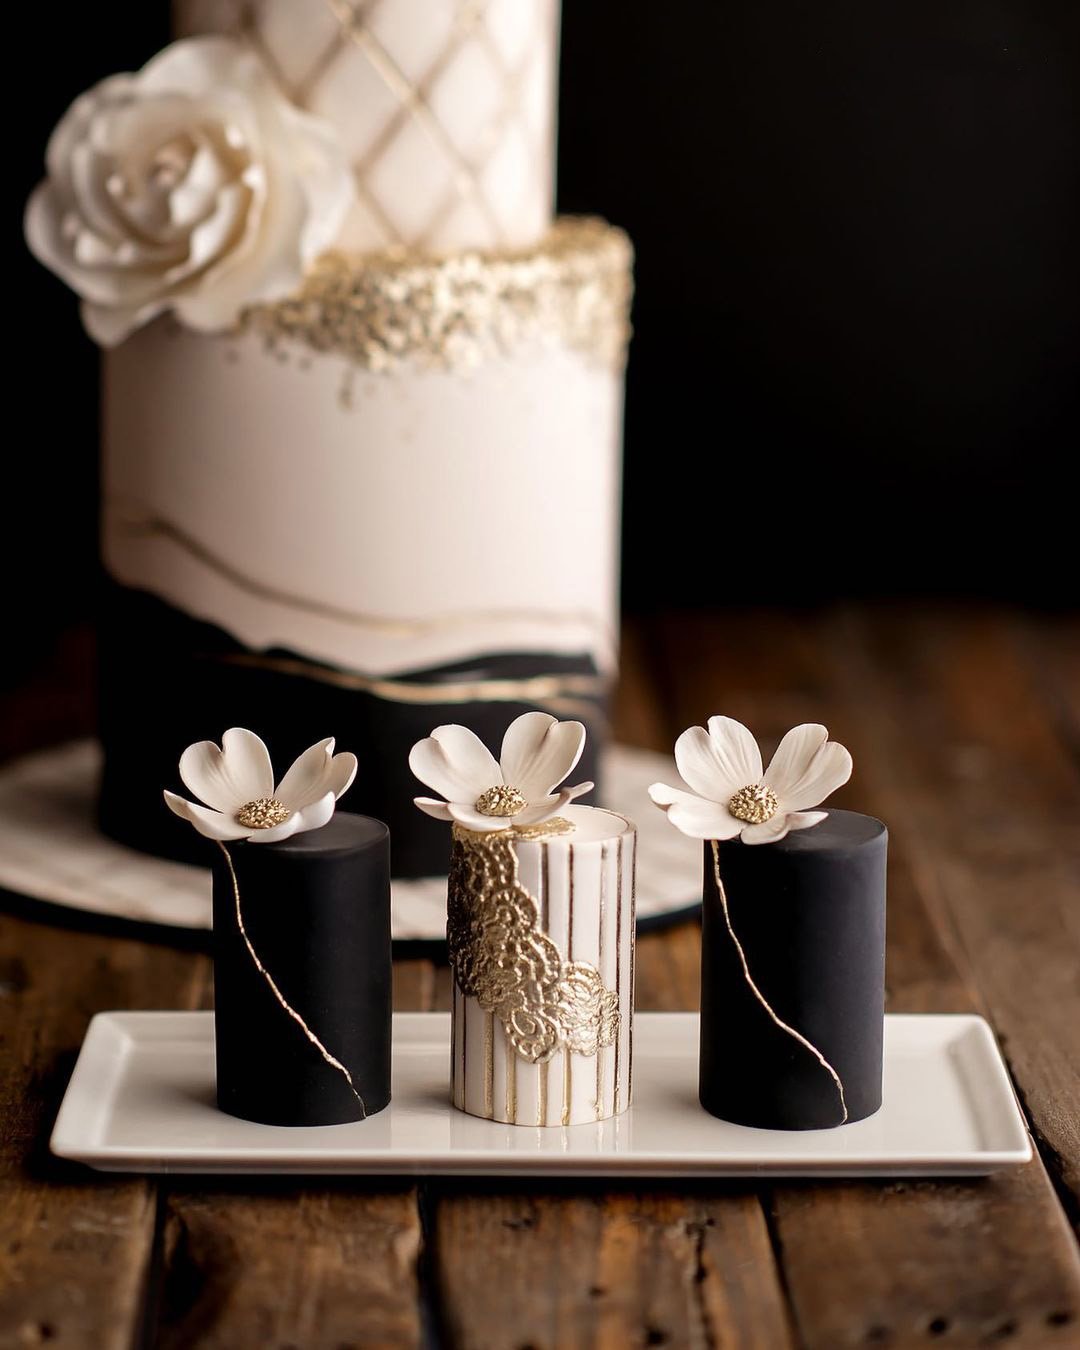 black and white wedding cakes chic gold with cupcake and flowers delacremestudio